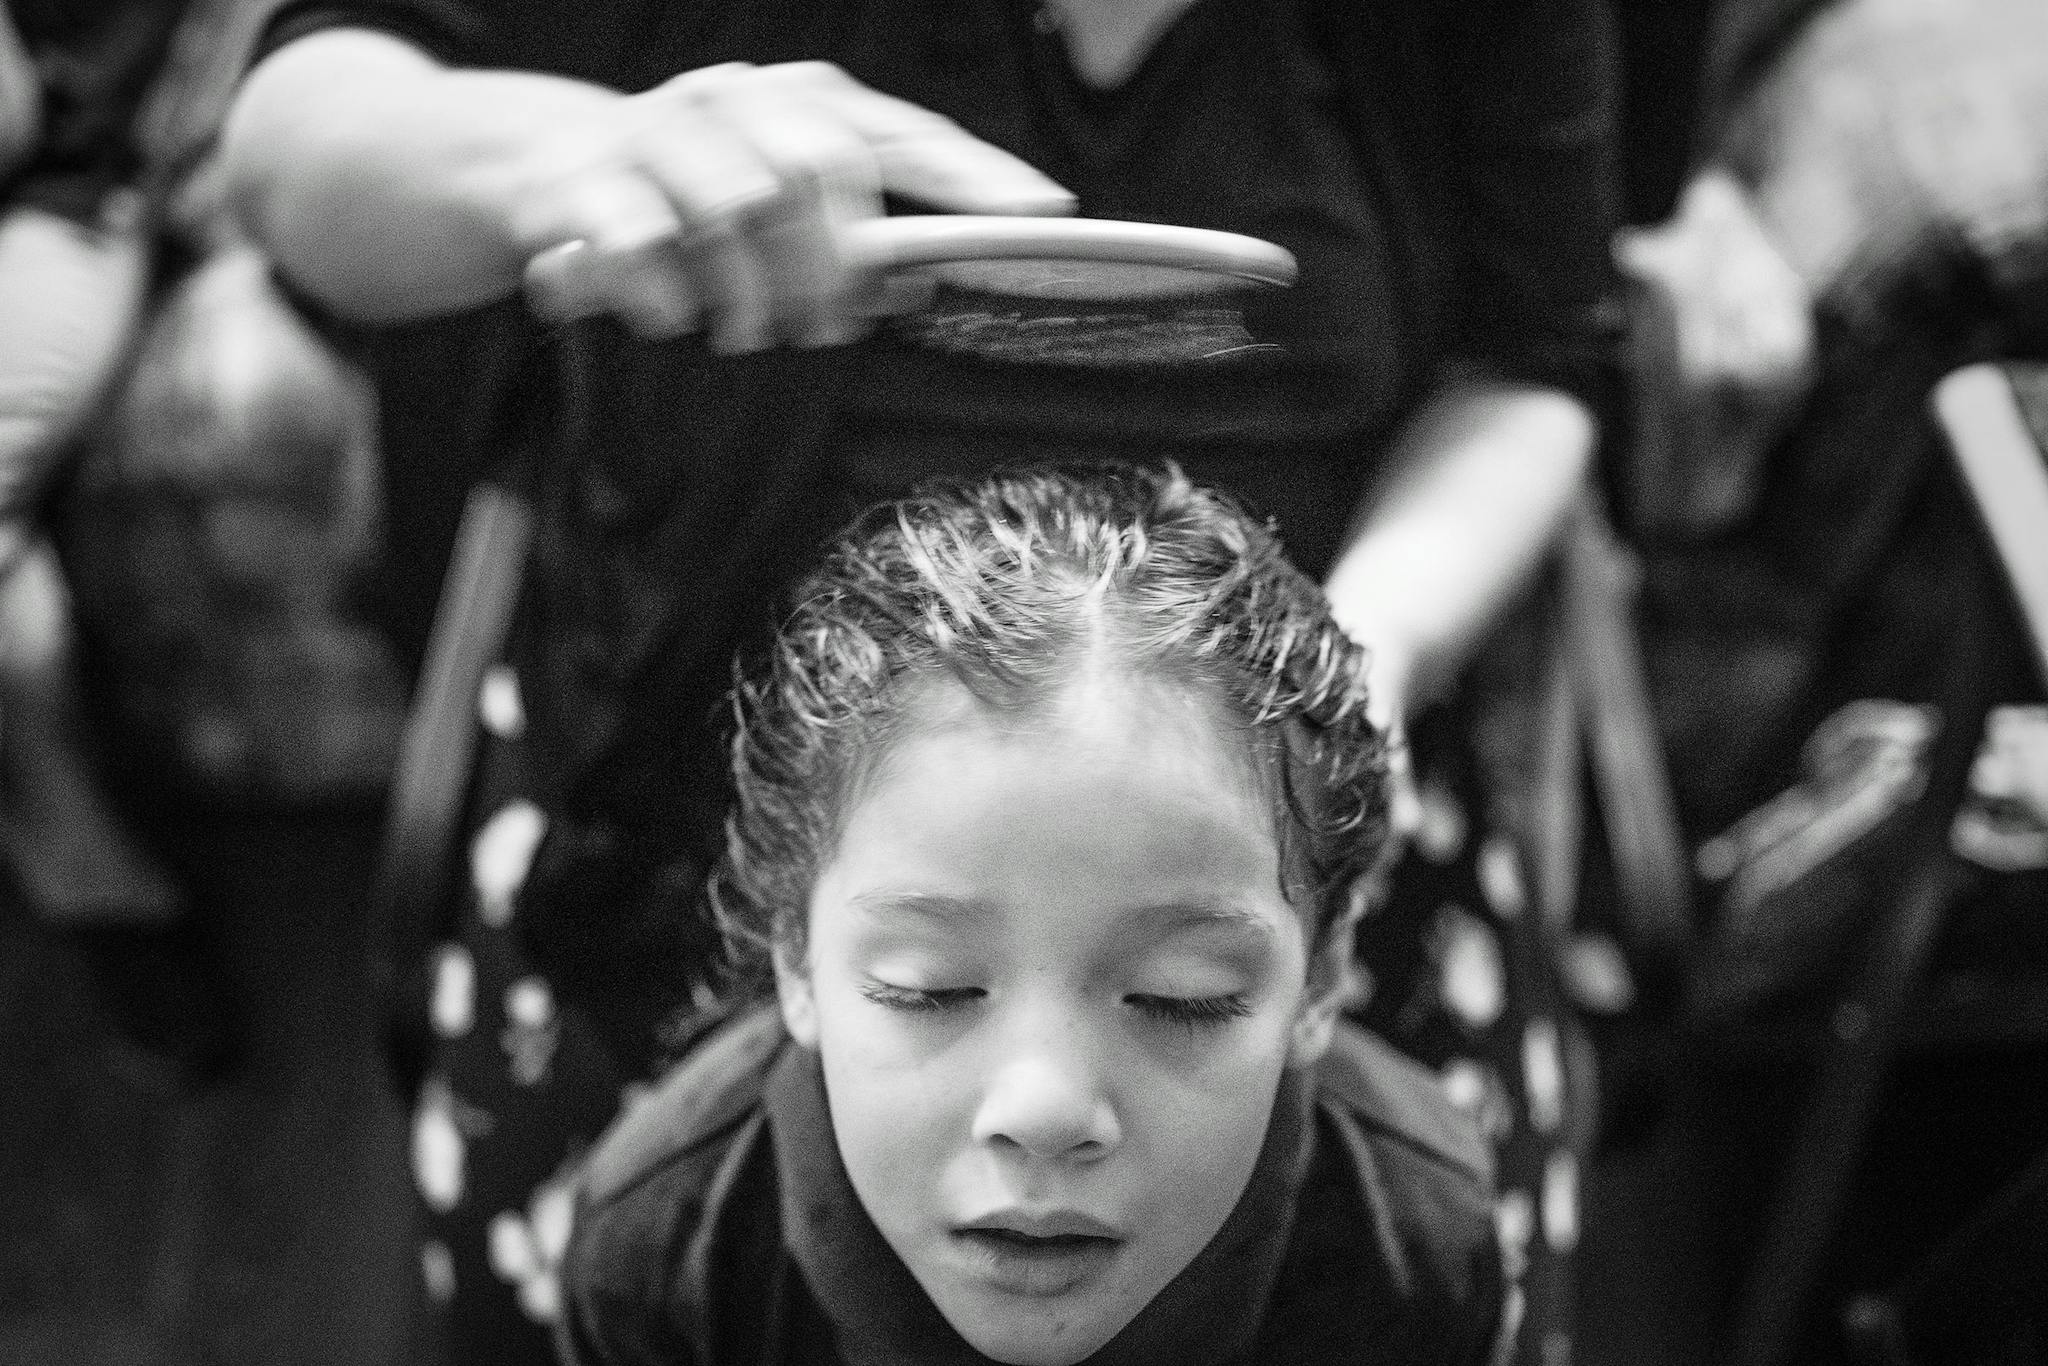 Kayla Isuala, four, has her hair brushed by her mother, Cindy, after her morning shower.